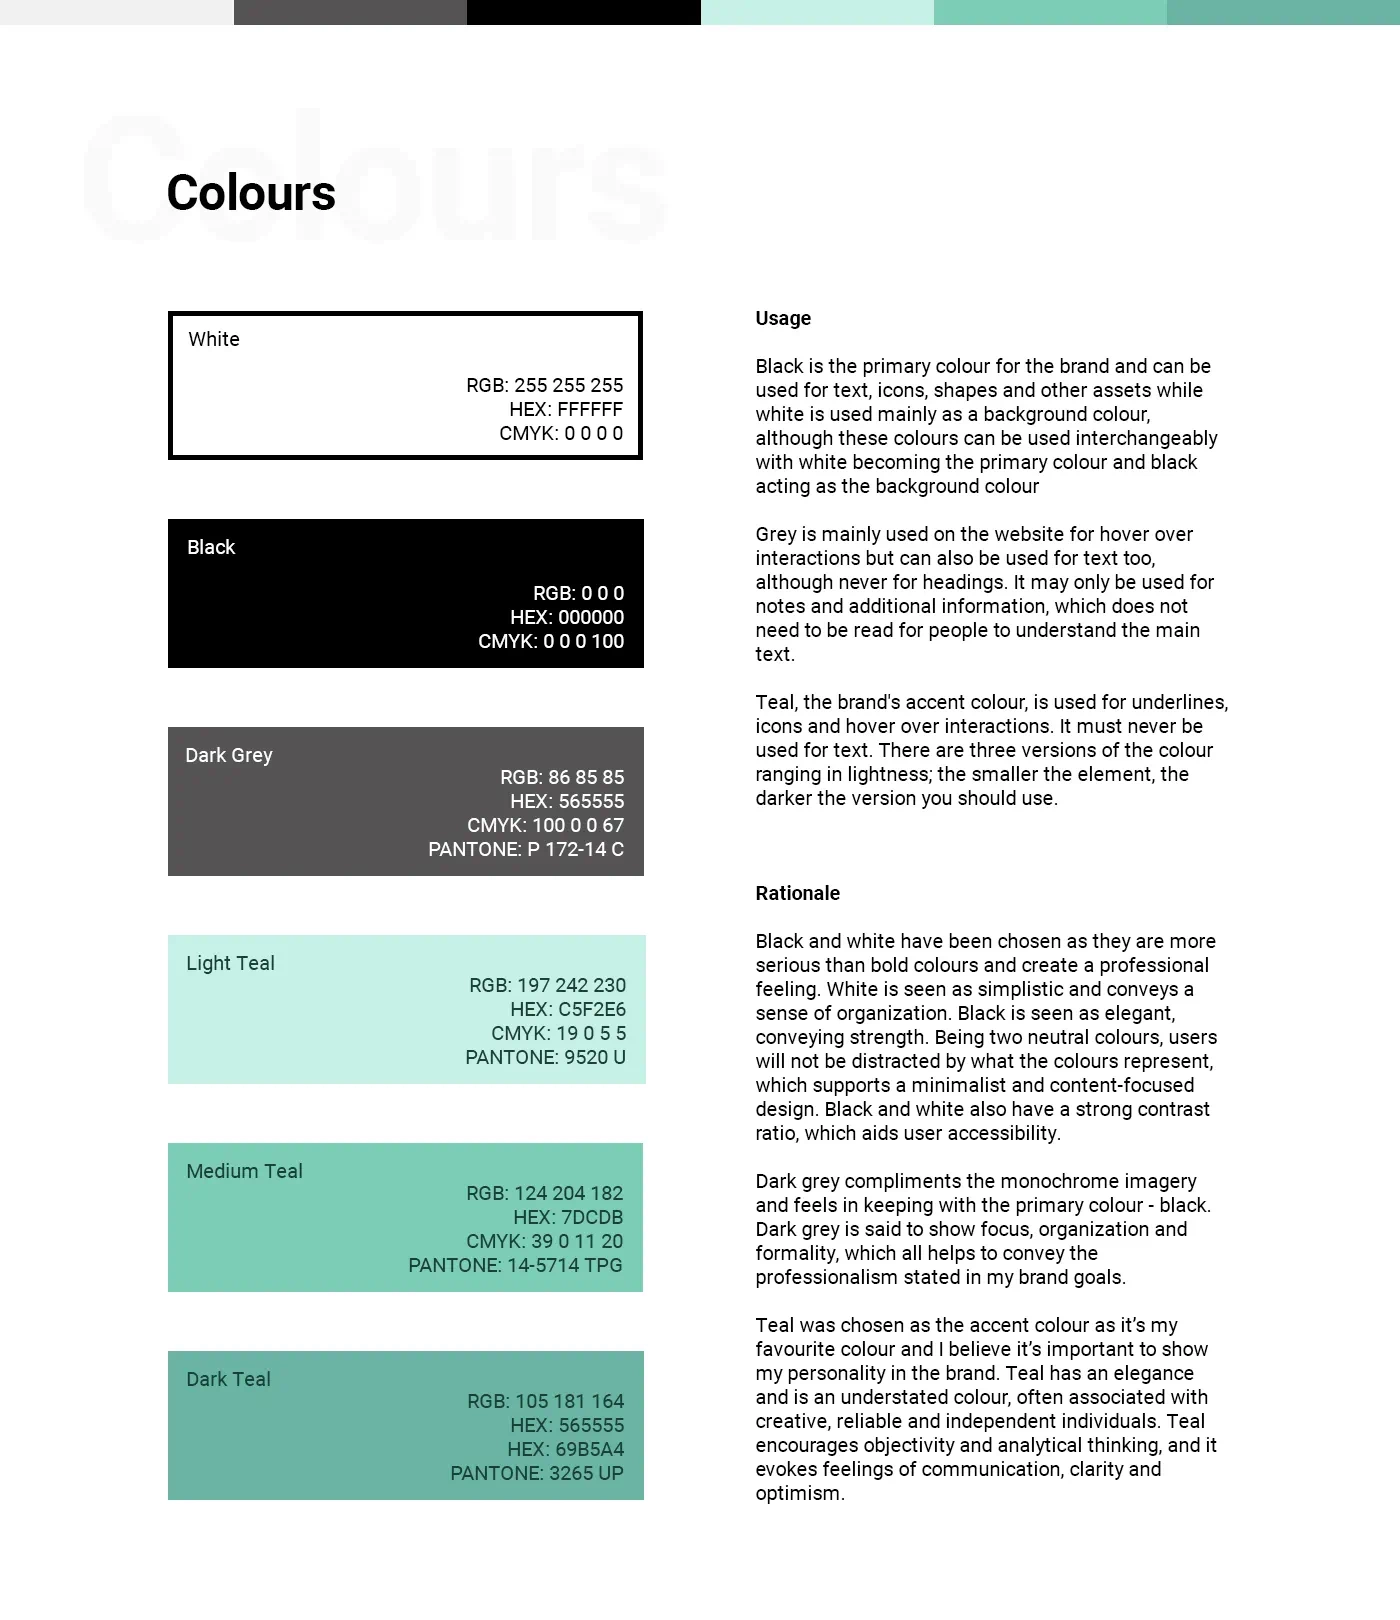 The colours page details the various colours to be used by the brand